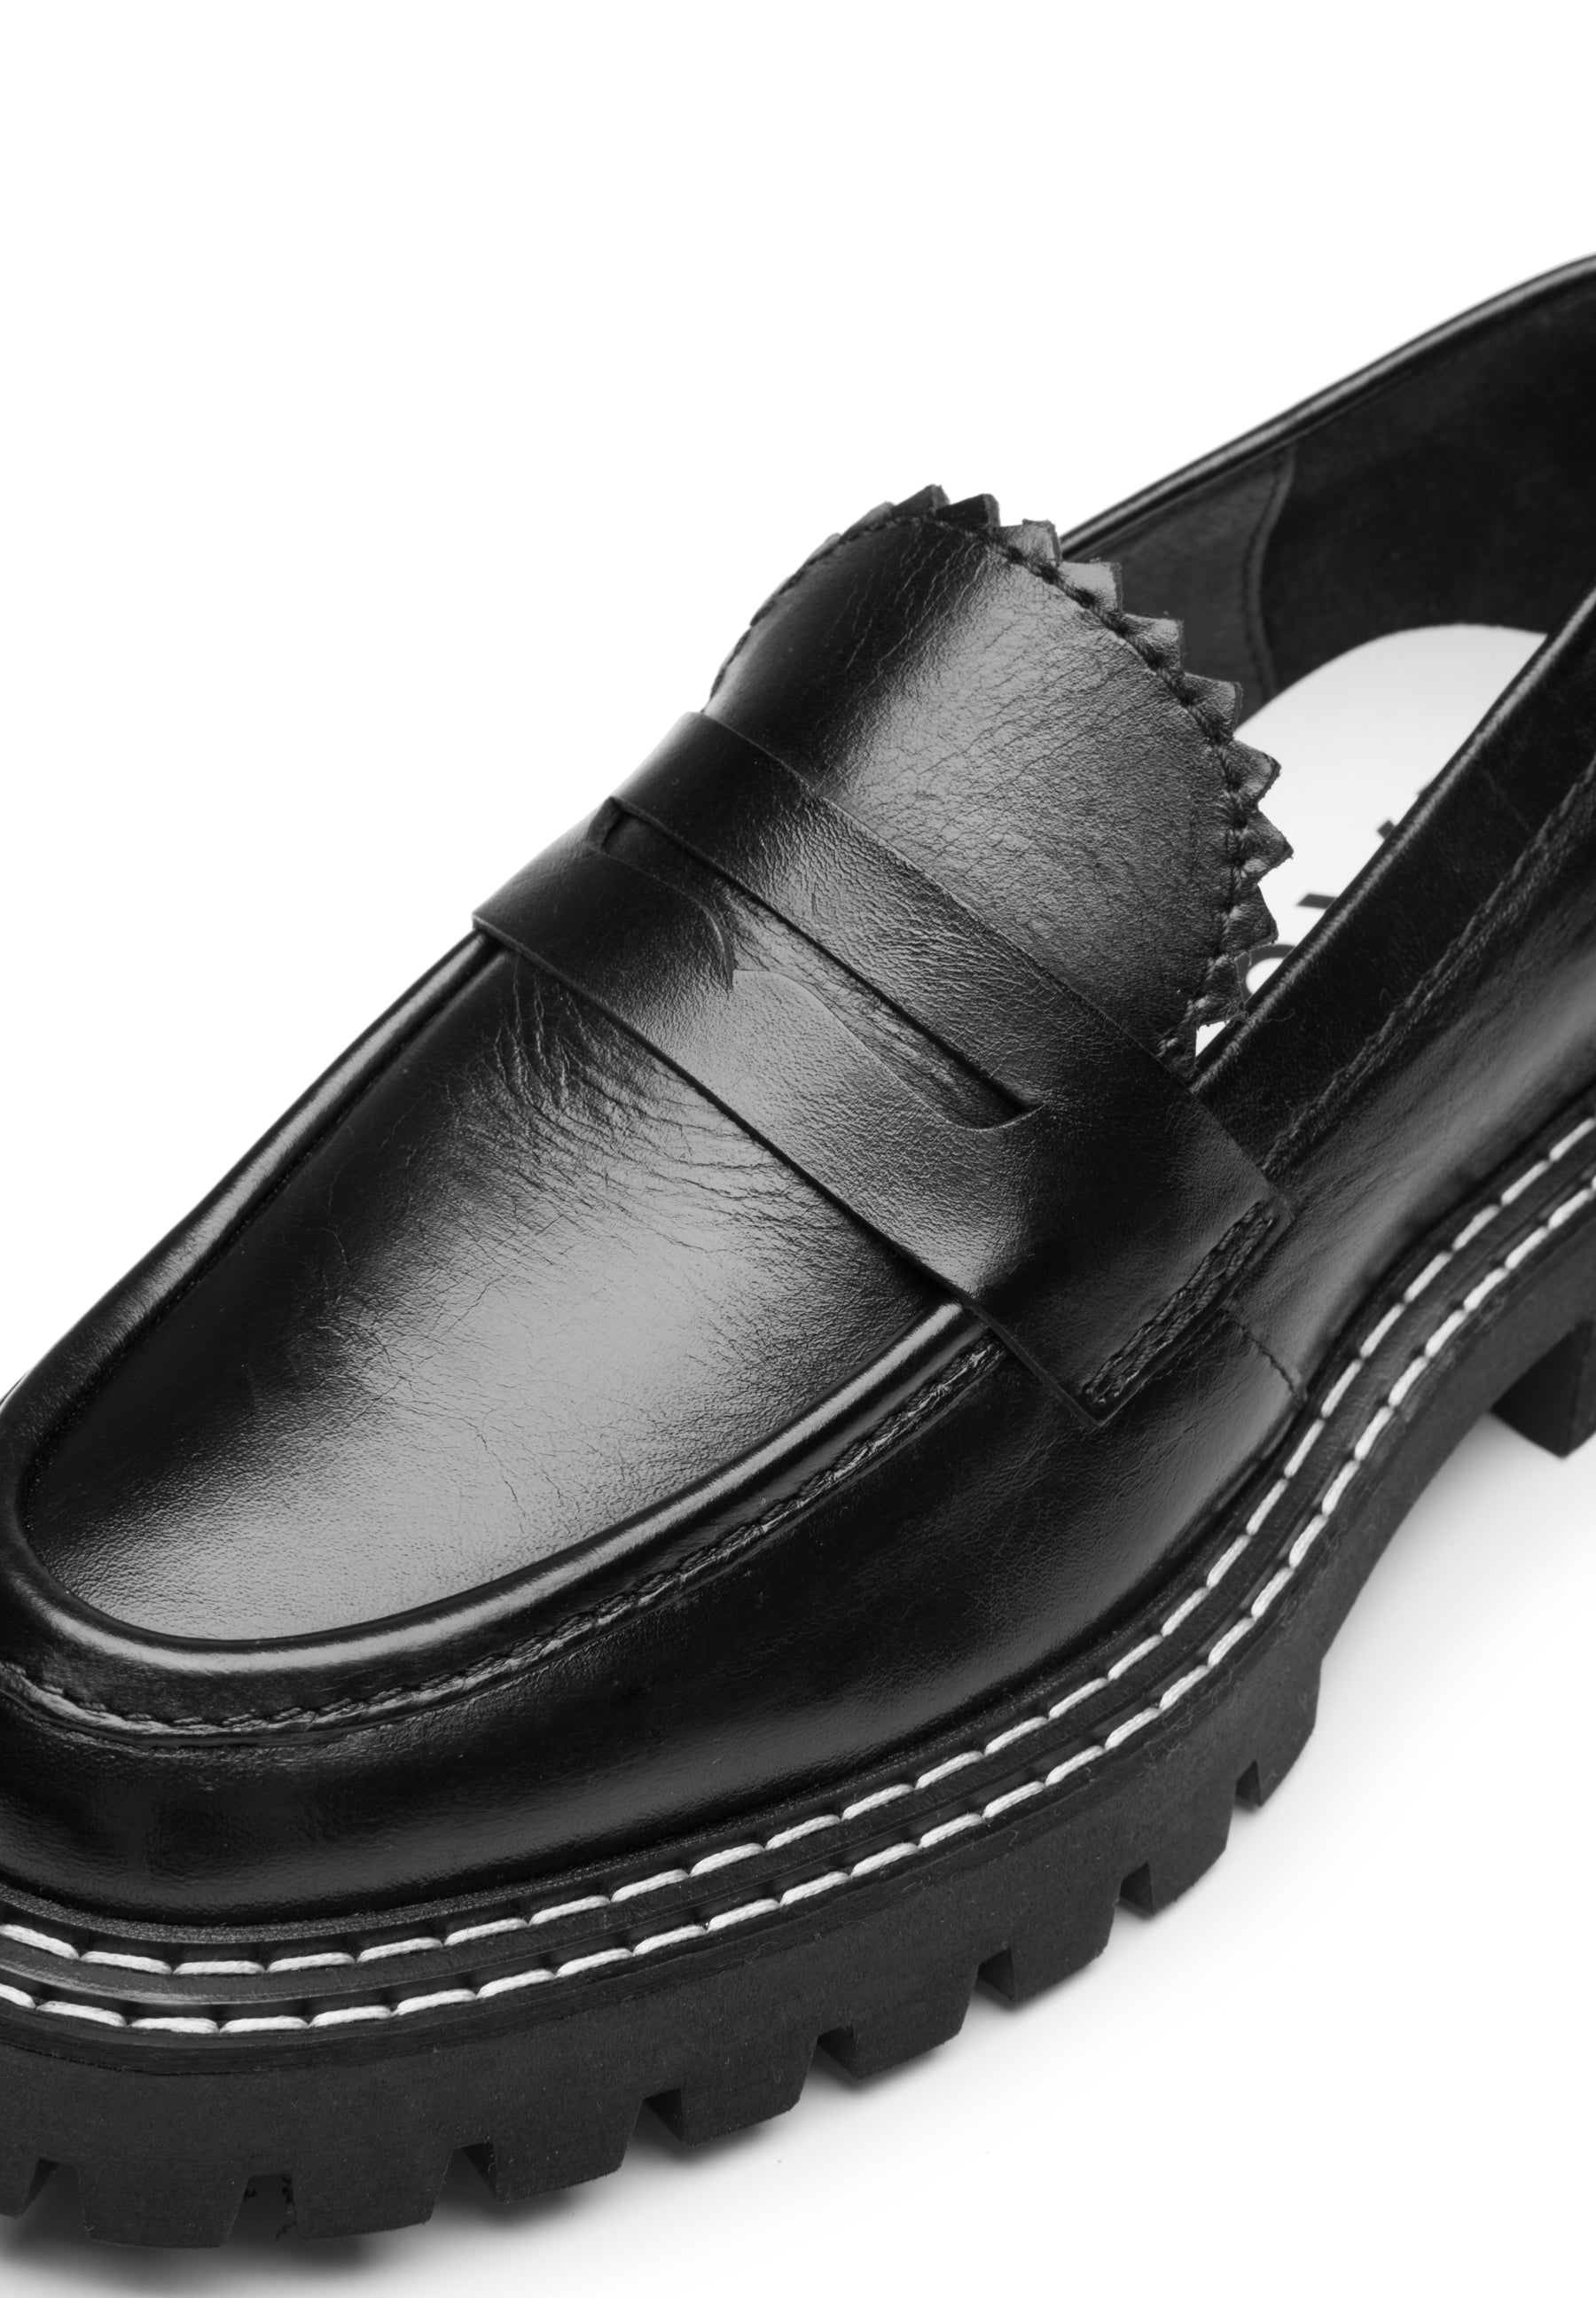 Matter Black Leather Loafers LAST1679 - 5